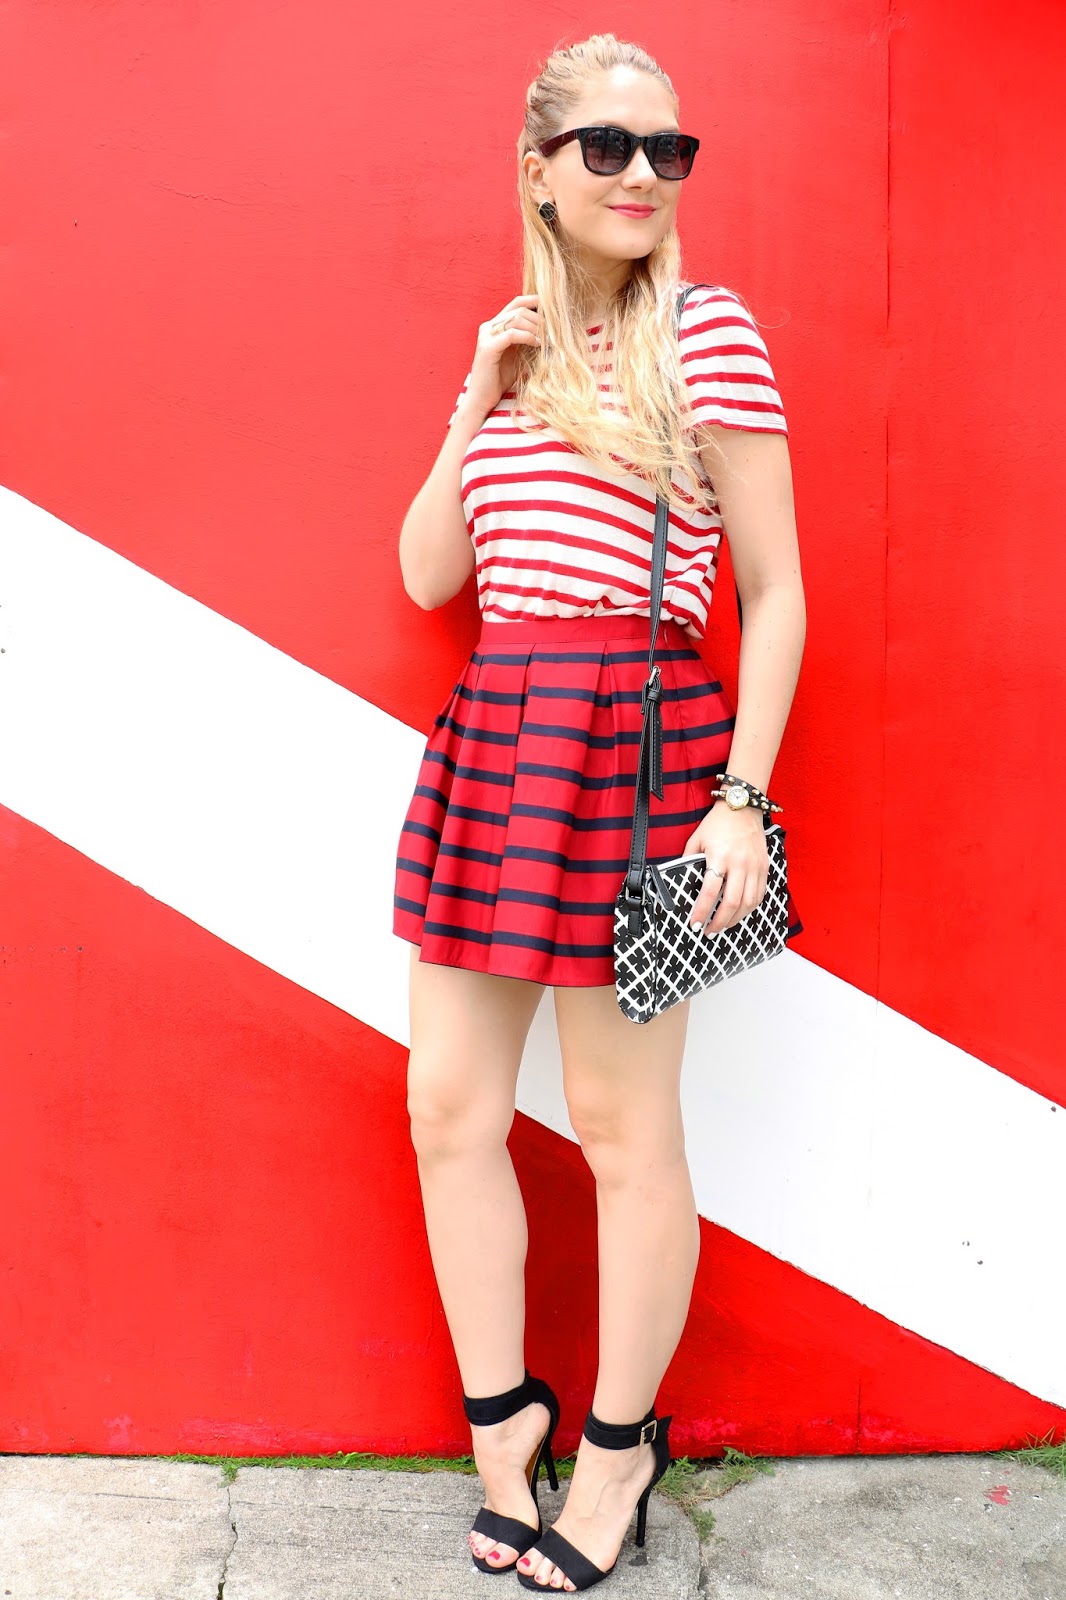 Love this outfit featuring lots of stripes!